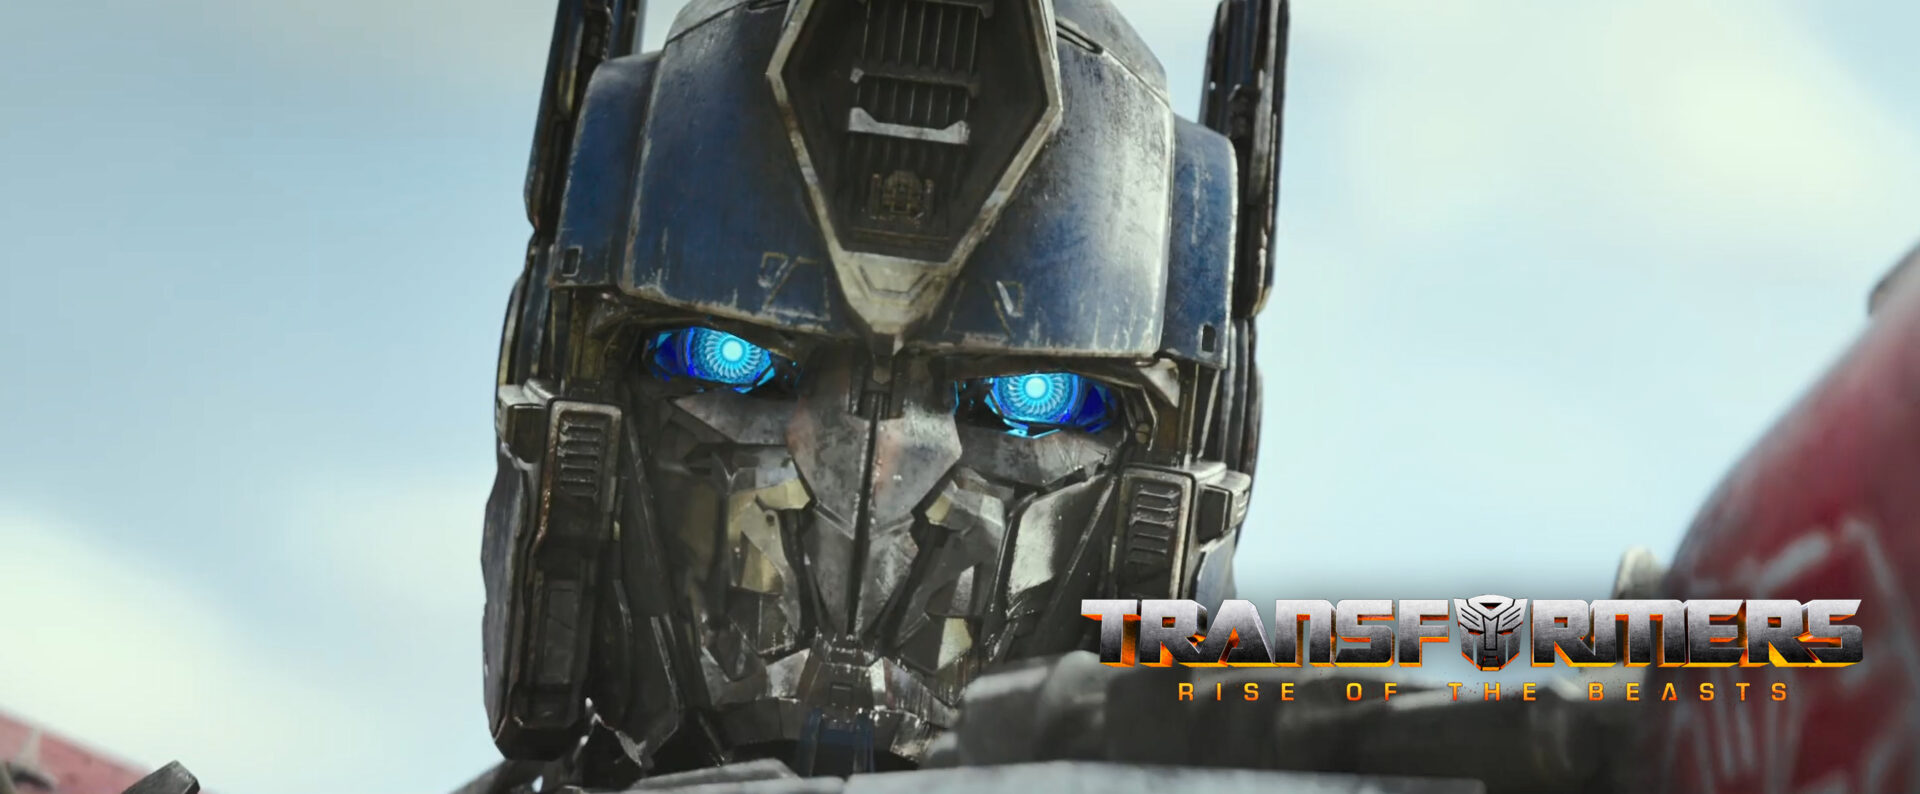 transformers rise of the beasts teaser trailer